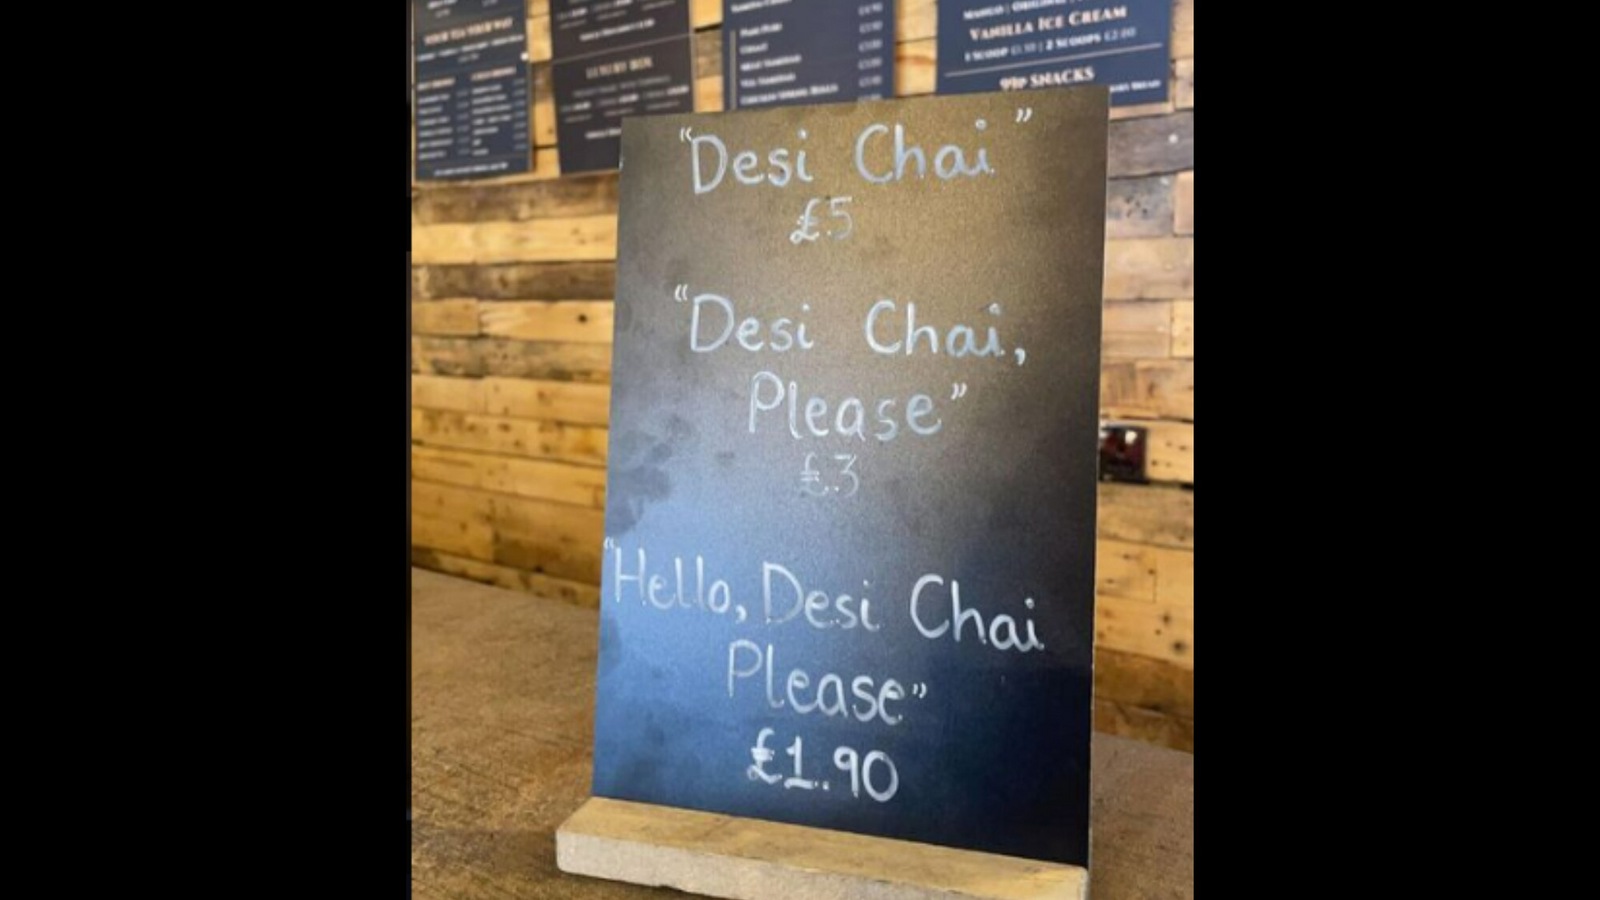 uk-cafe-charges-differently-based-on-how-polite-or-rude-one-is-see-pic-of-menu